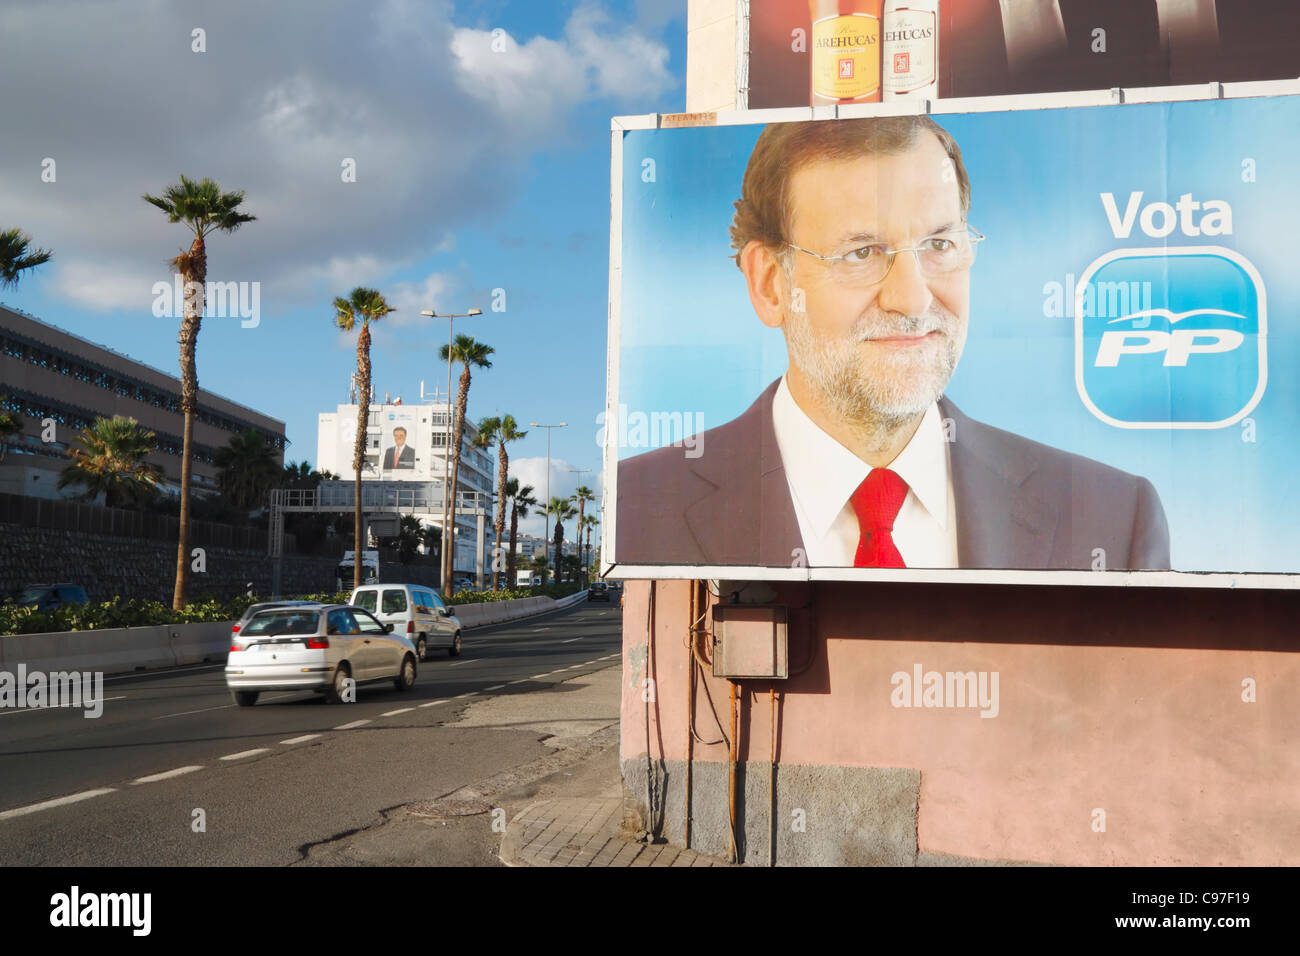 Las Palmas, Gran Canaria, Canary Islands, Spain, 15tth November 2011. Billboard depicting Marion Rahoy, leader of the Partido Popular (PP). Spanish general election is on 20th November 2011 Stock Photo